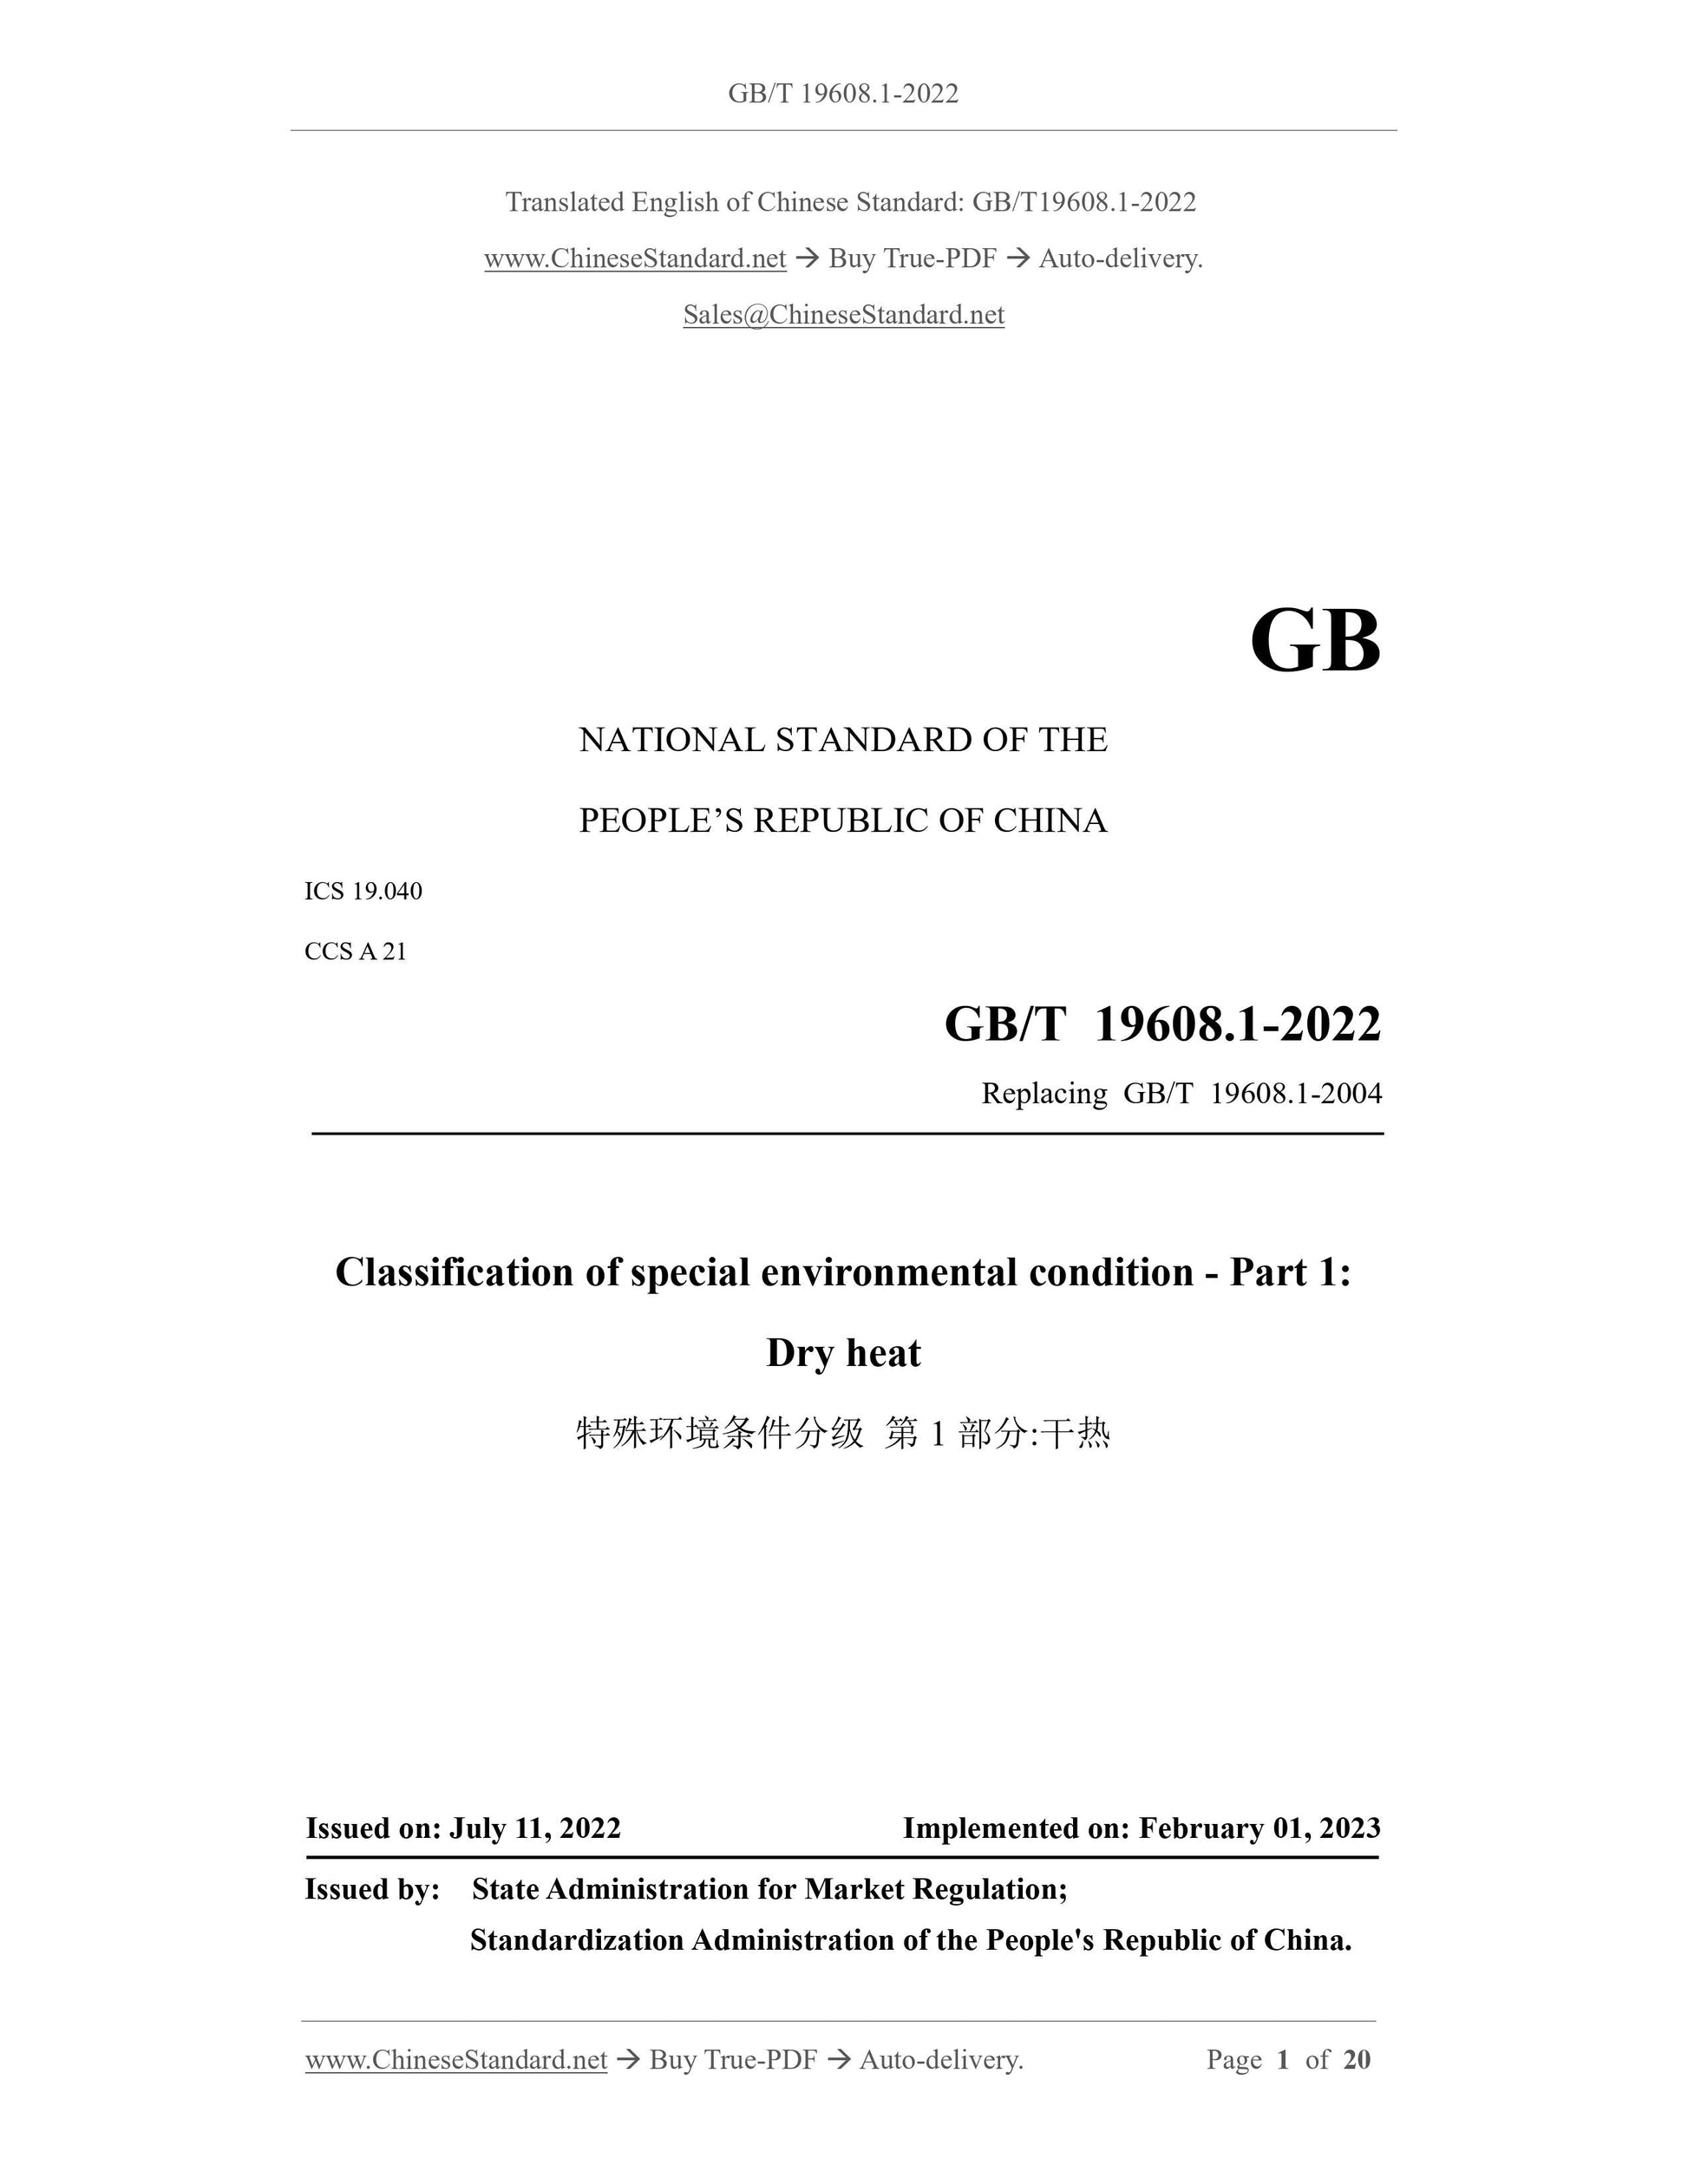 GB/T 19608.1-2022 Page 1